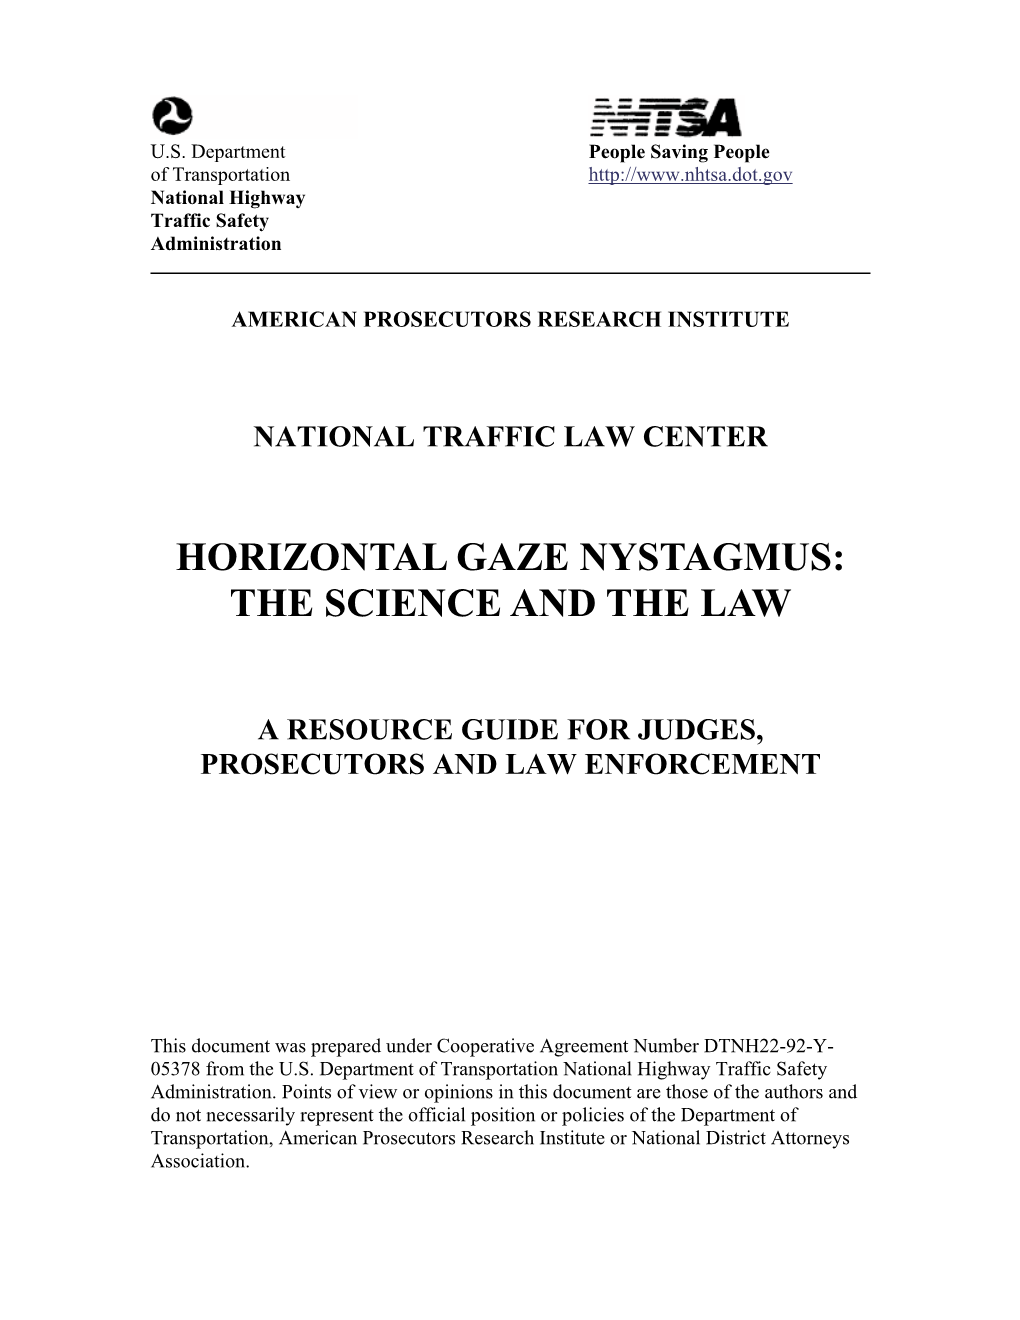 Horizontal Gaze Nystagmus: the Science and the Law – a Resource